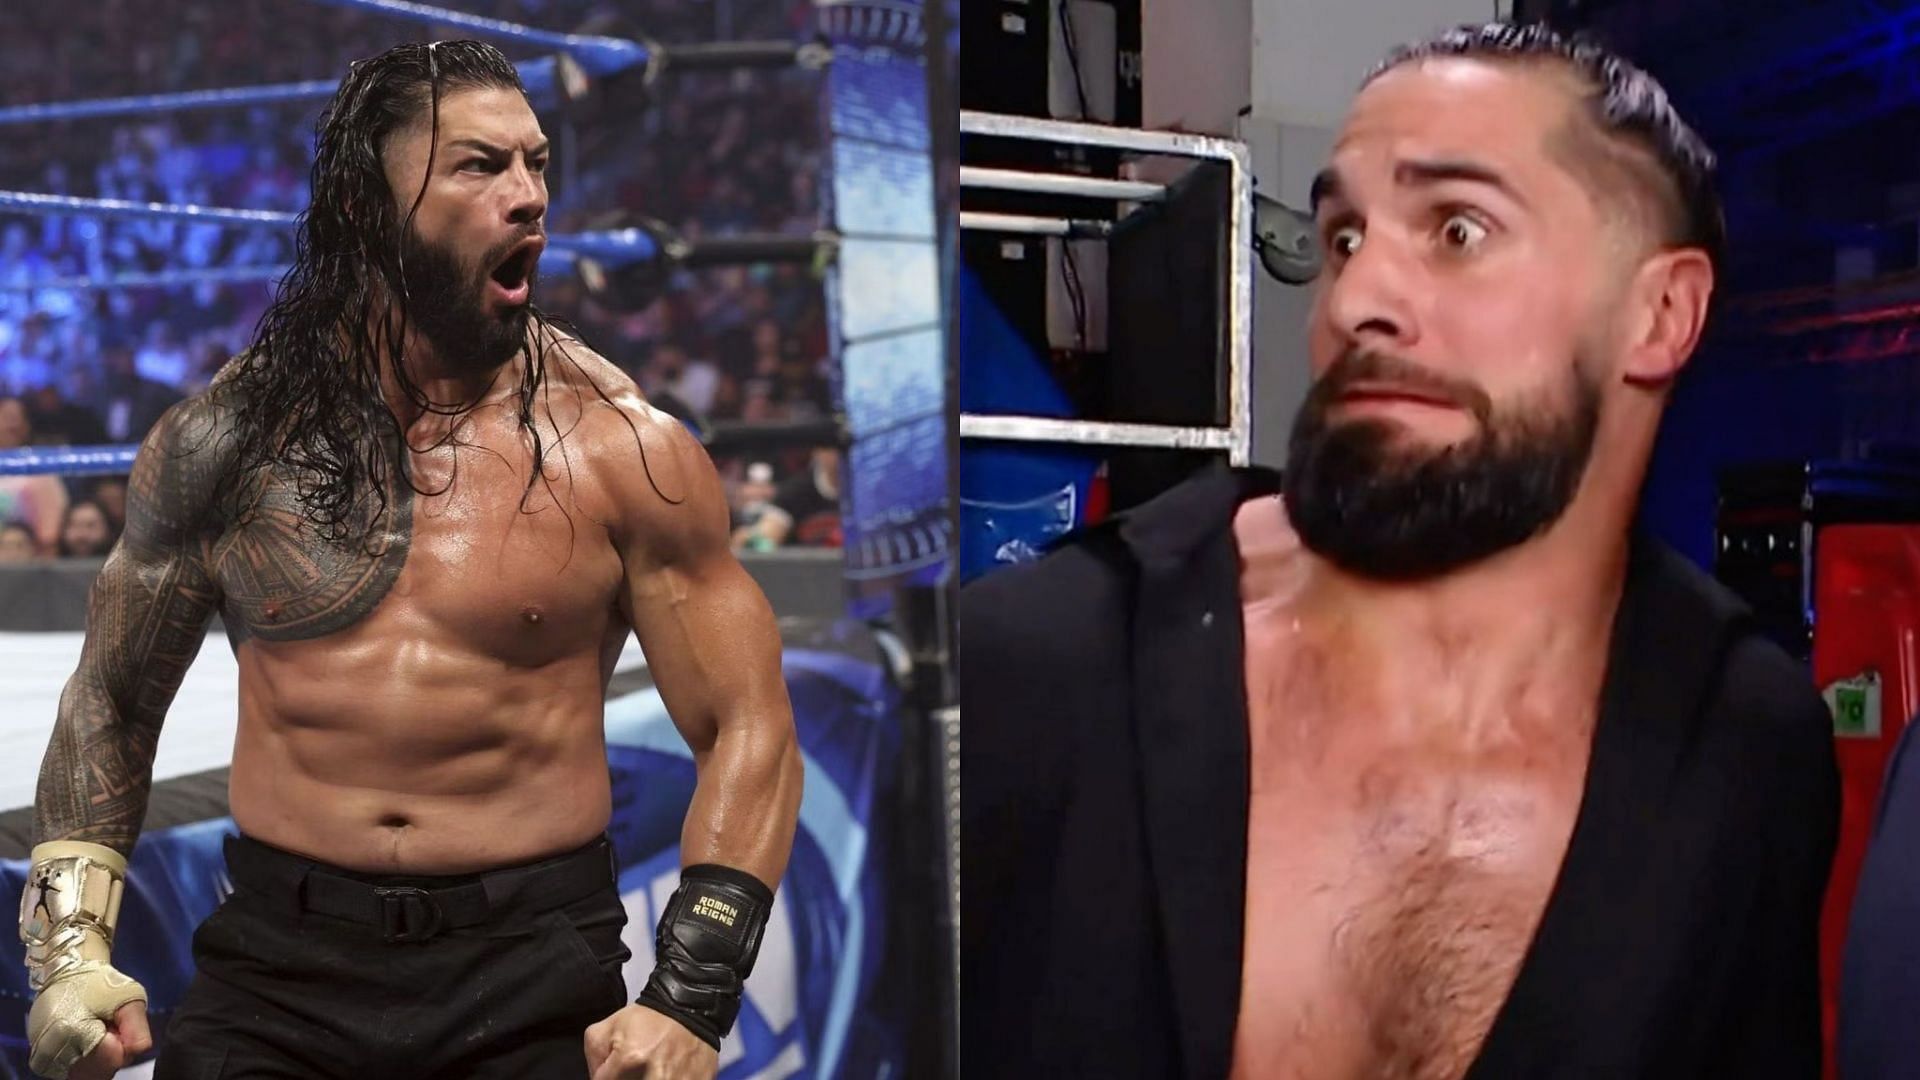 Undisputed WWE Universal Champion Roman Reigns (left) and World Heavyweight Champion Seth Rollins (right)